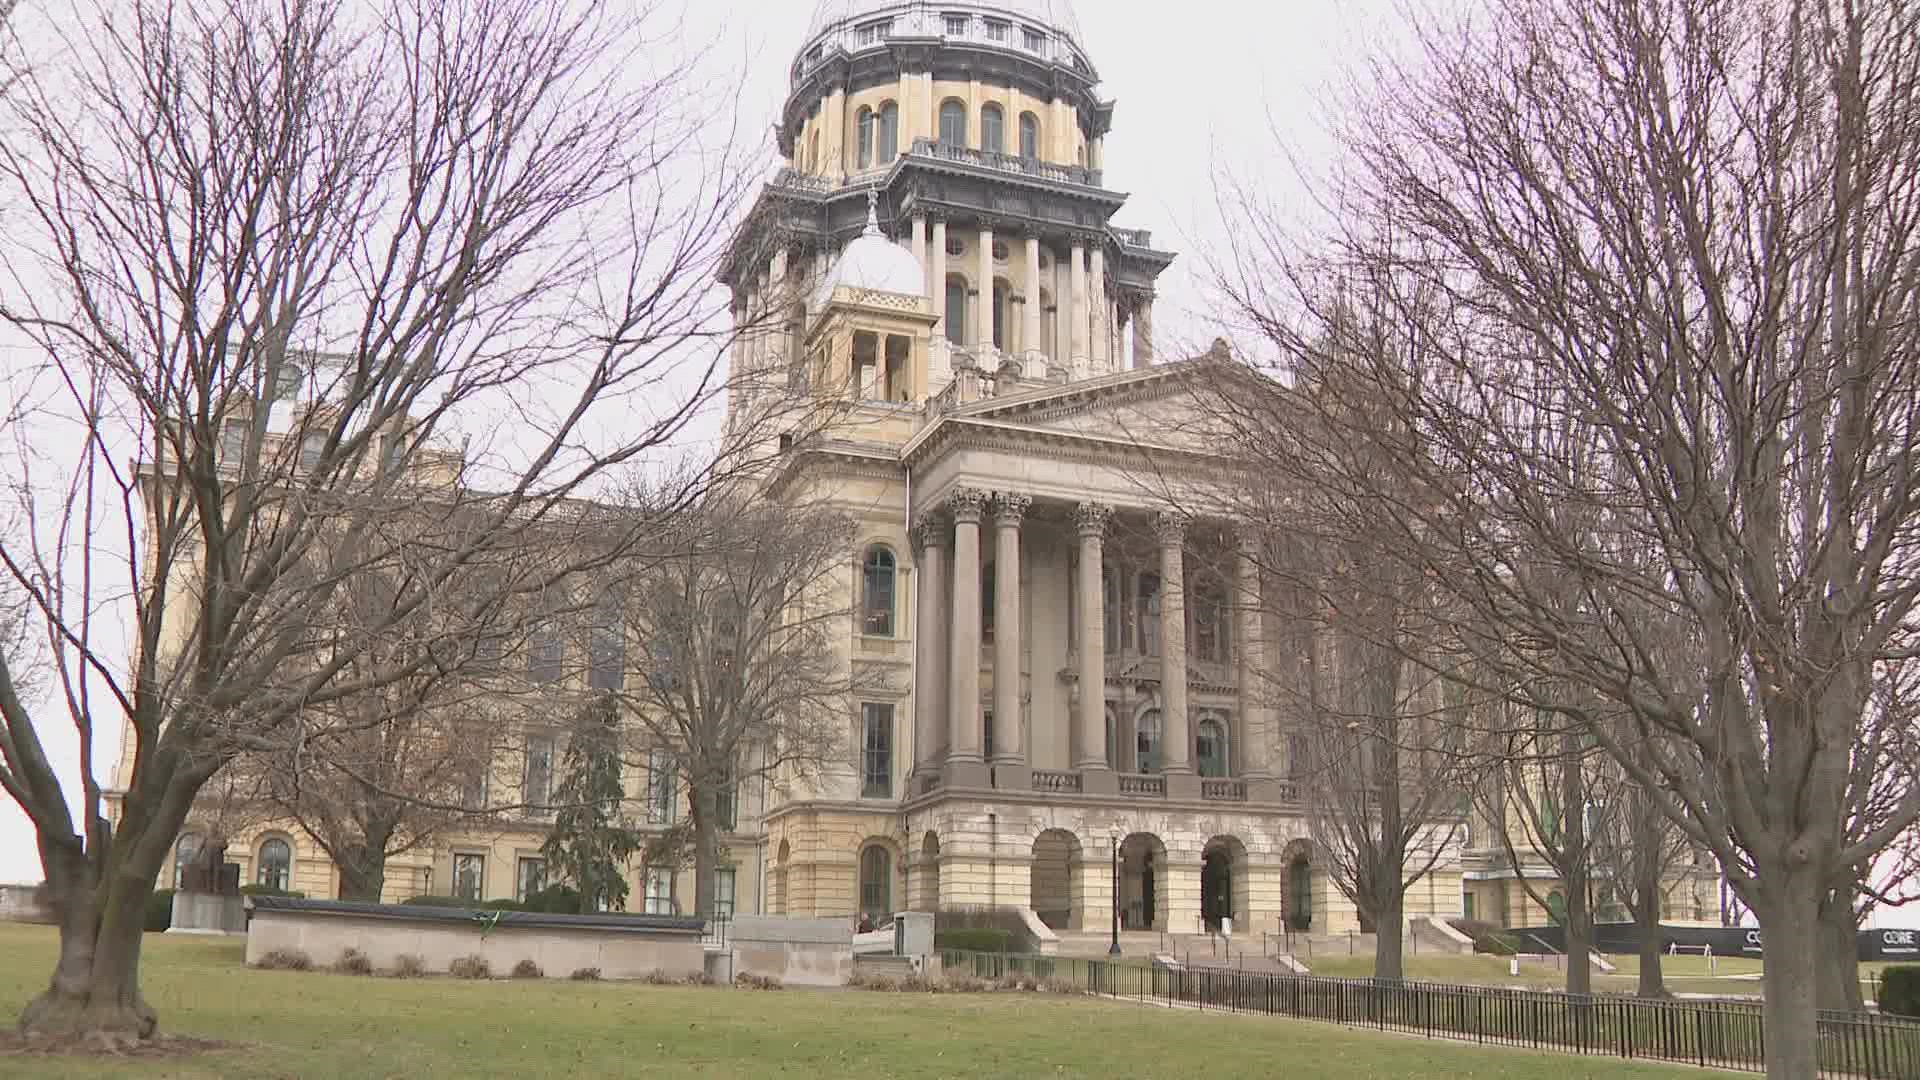 The Senate has until Wednesday morning to pass the bill if they don’t make any modifications. Then it will be sent to Governor JB Pritzker’s desk.